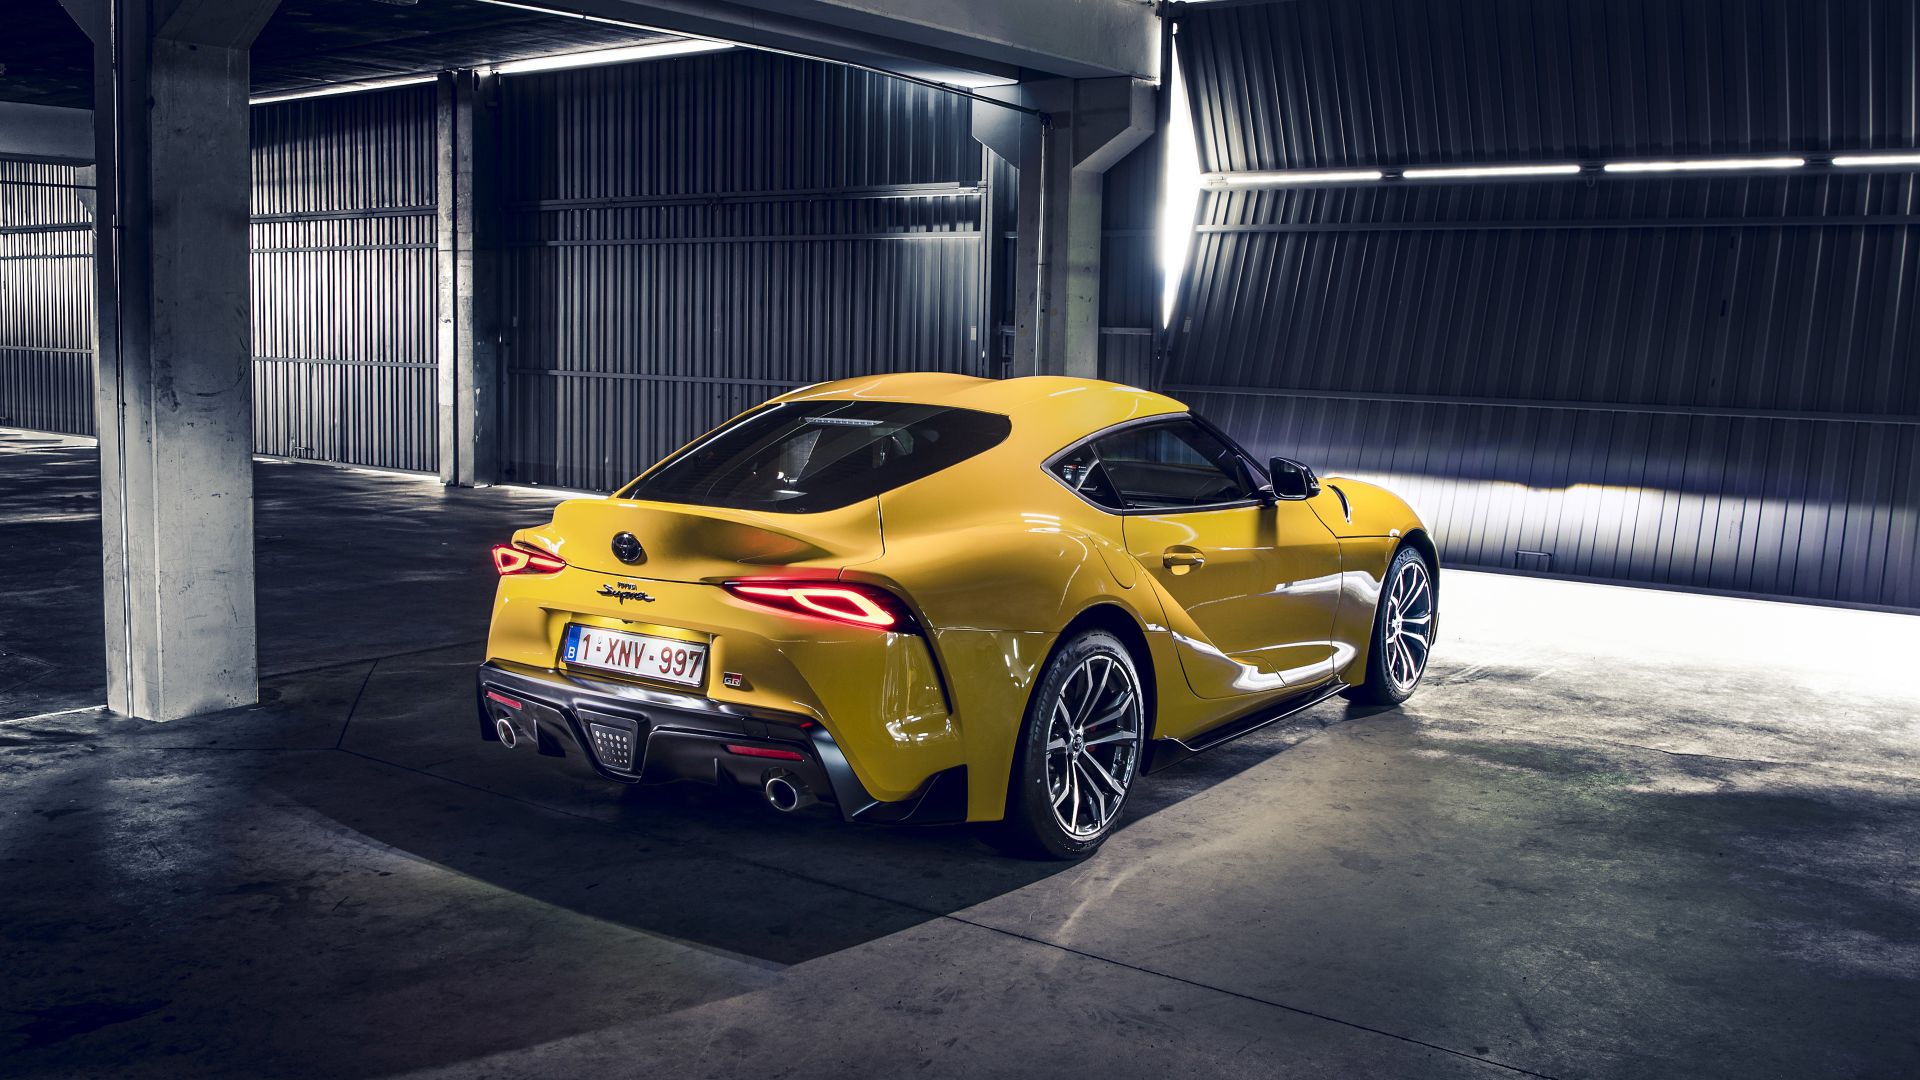 Toyota Supra, Sport Car, Rear View Wallpaper, HD Image, Picture, Background, 0d8c61